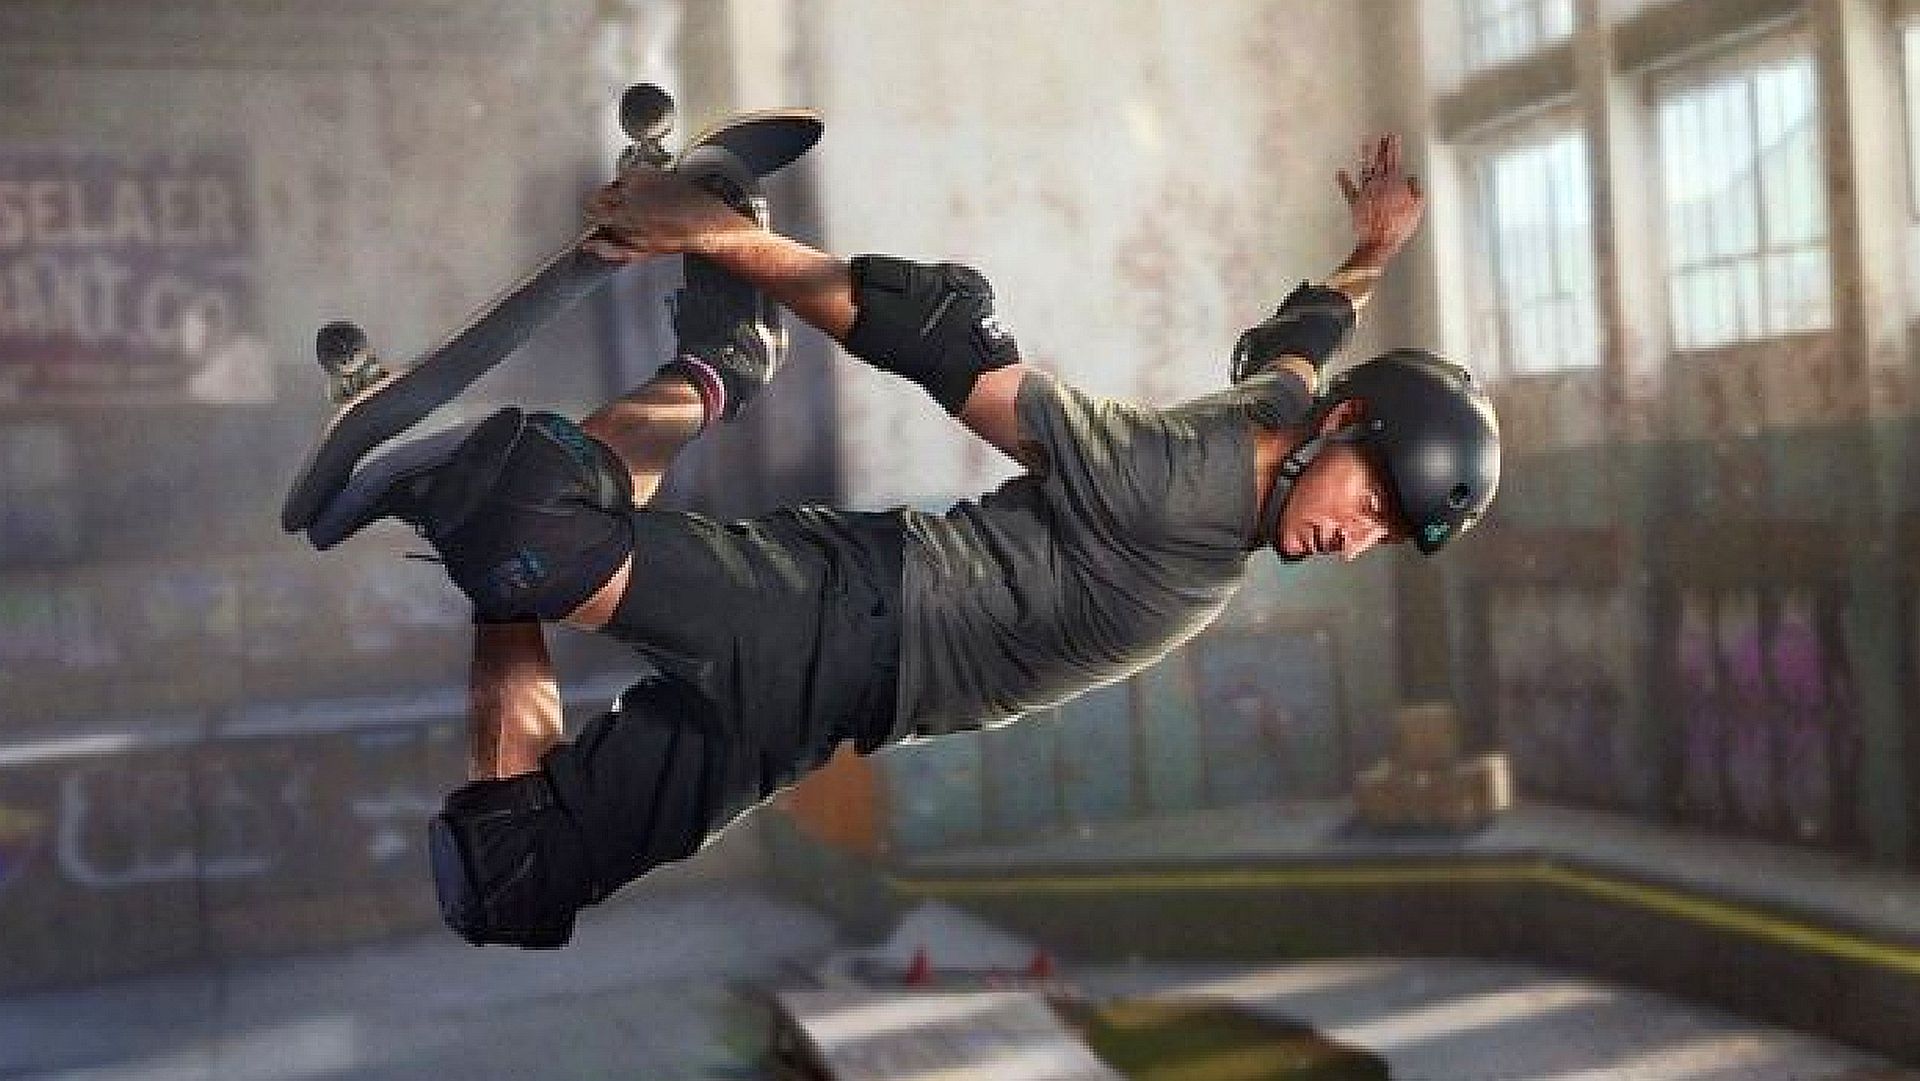 Tony Hawk's Pro Skater 3+4 remasters were planned, but scrapped